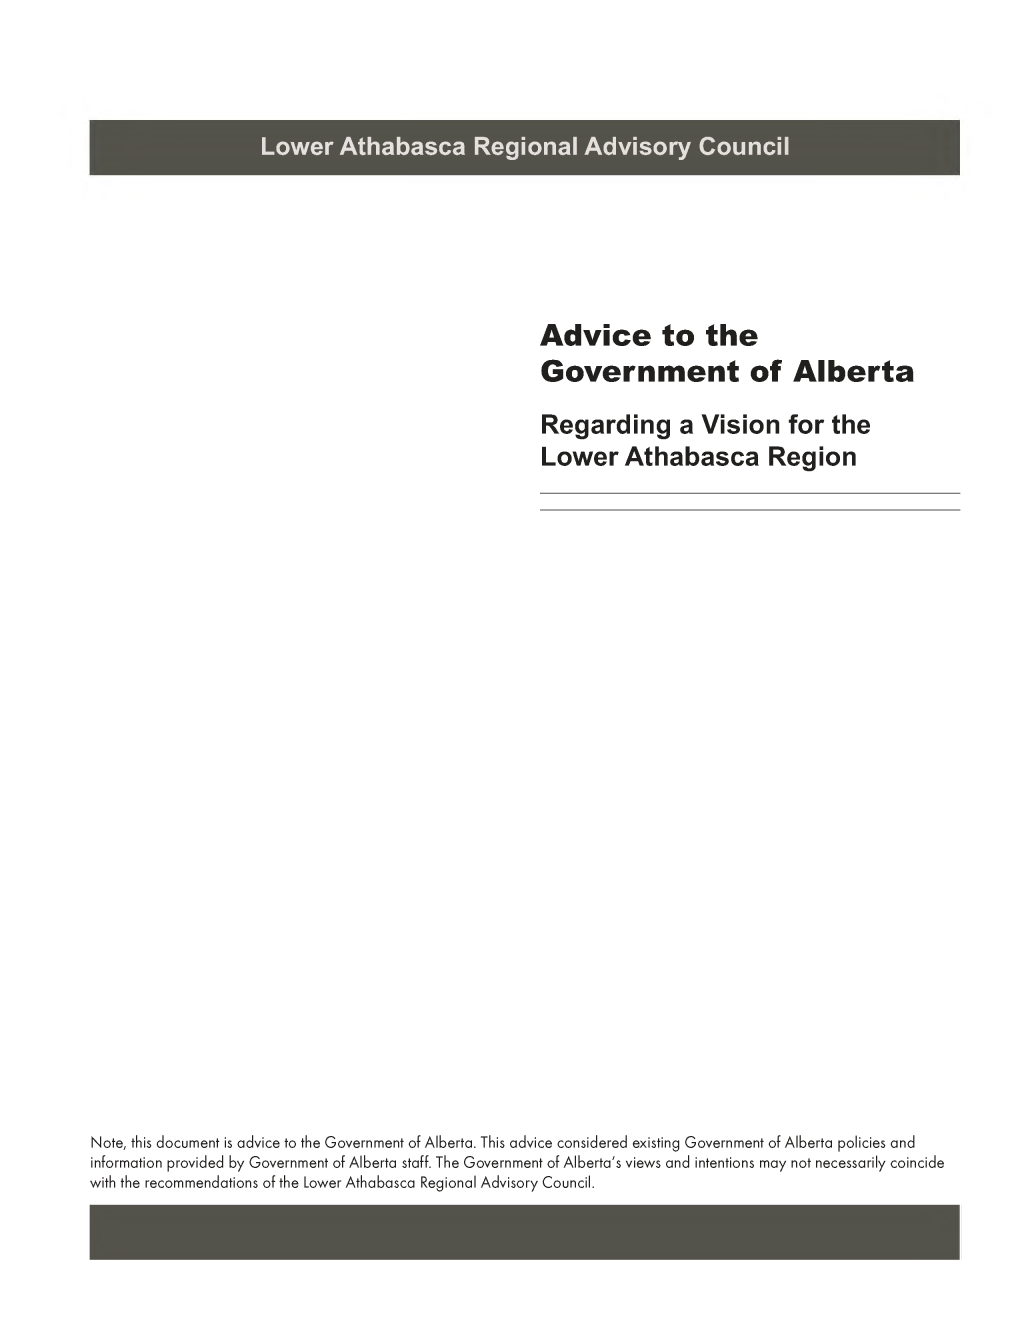 Advice to the Government of Alberta Regarding a Vision for the Lower Athabasca Region I 3.2 Overlays